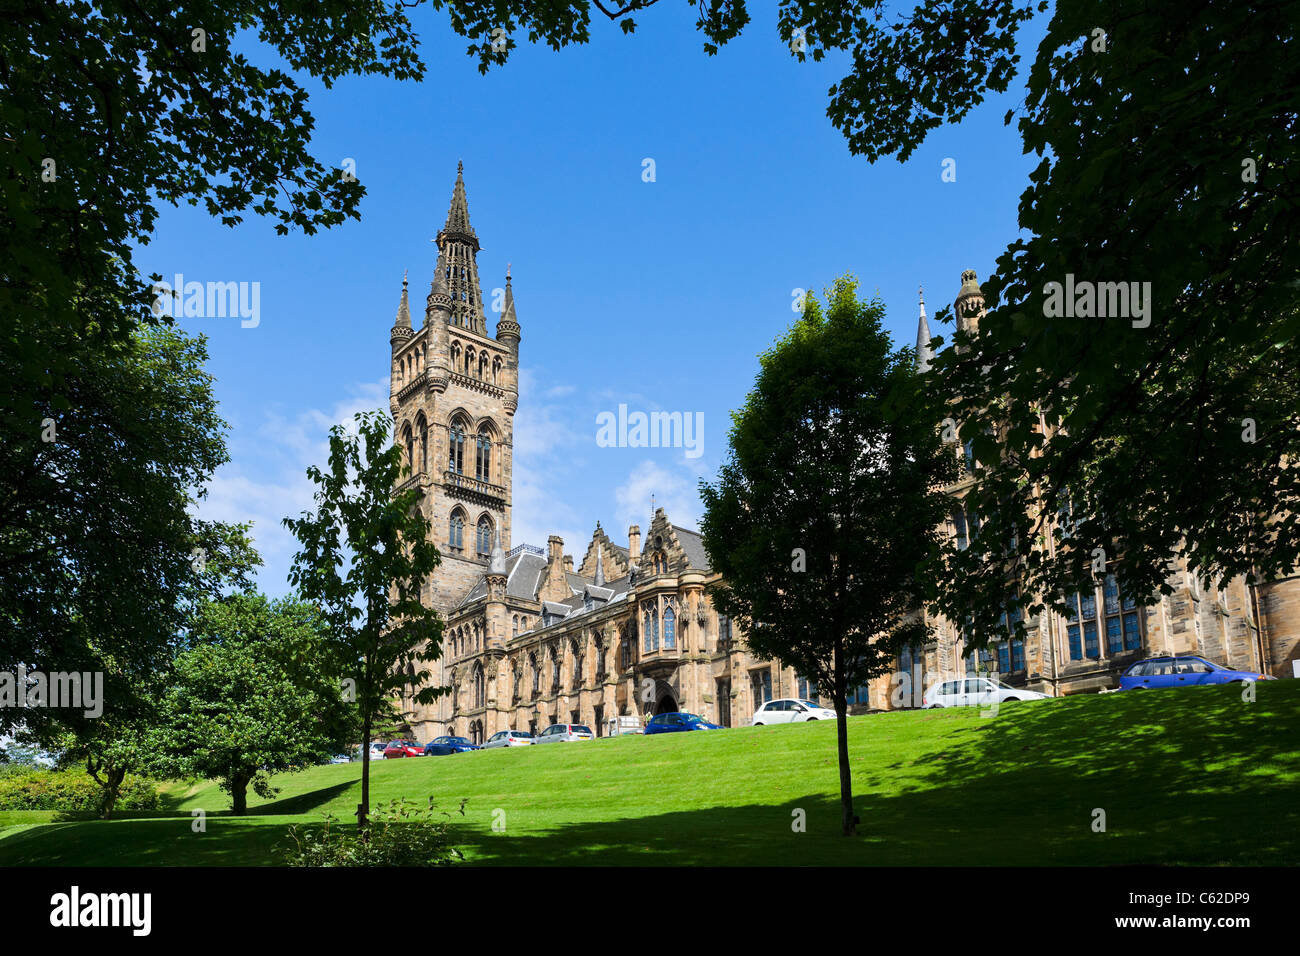 The 19thC tower of Glasgow University (designed by Sir George Gilbert Scott), West End, Glasgow, Scotland, UK Stock Photo